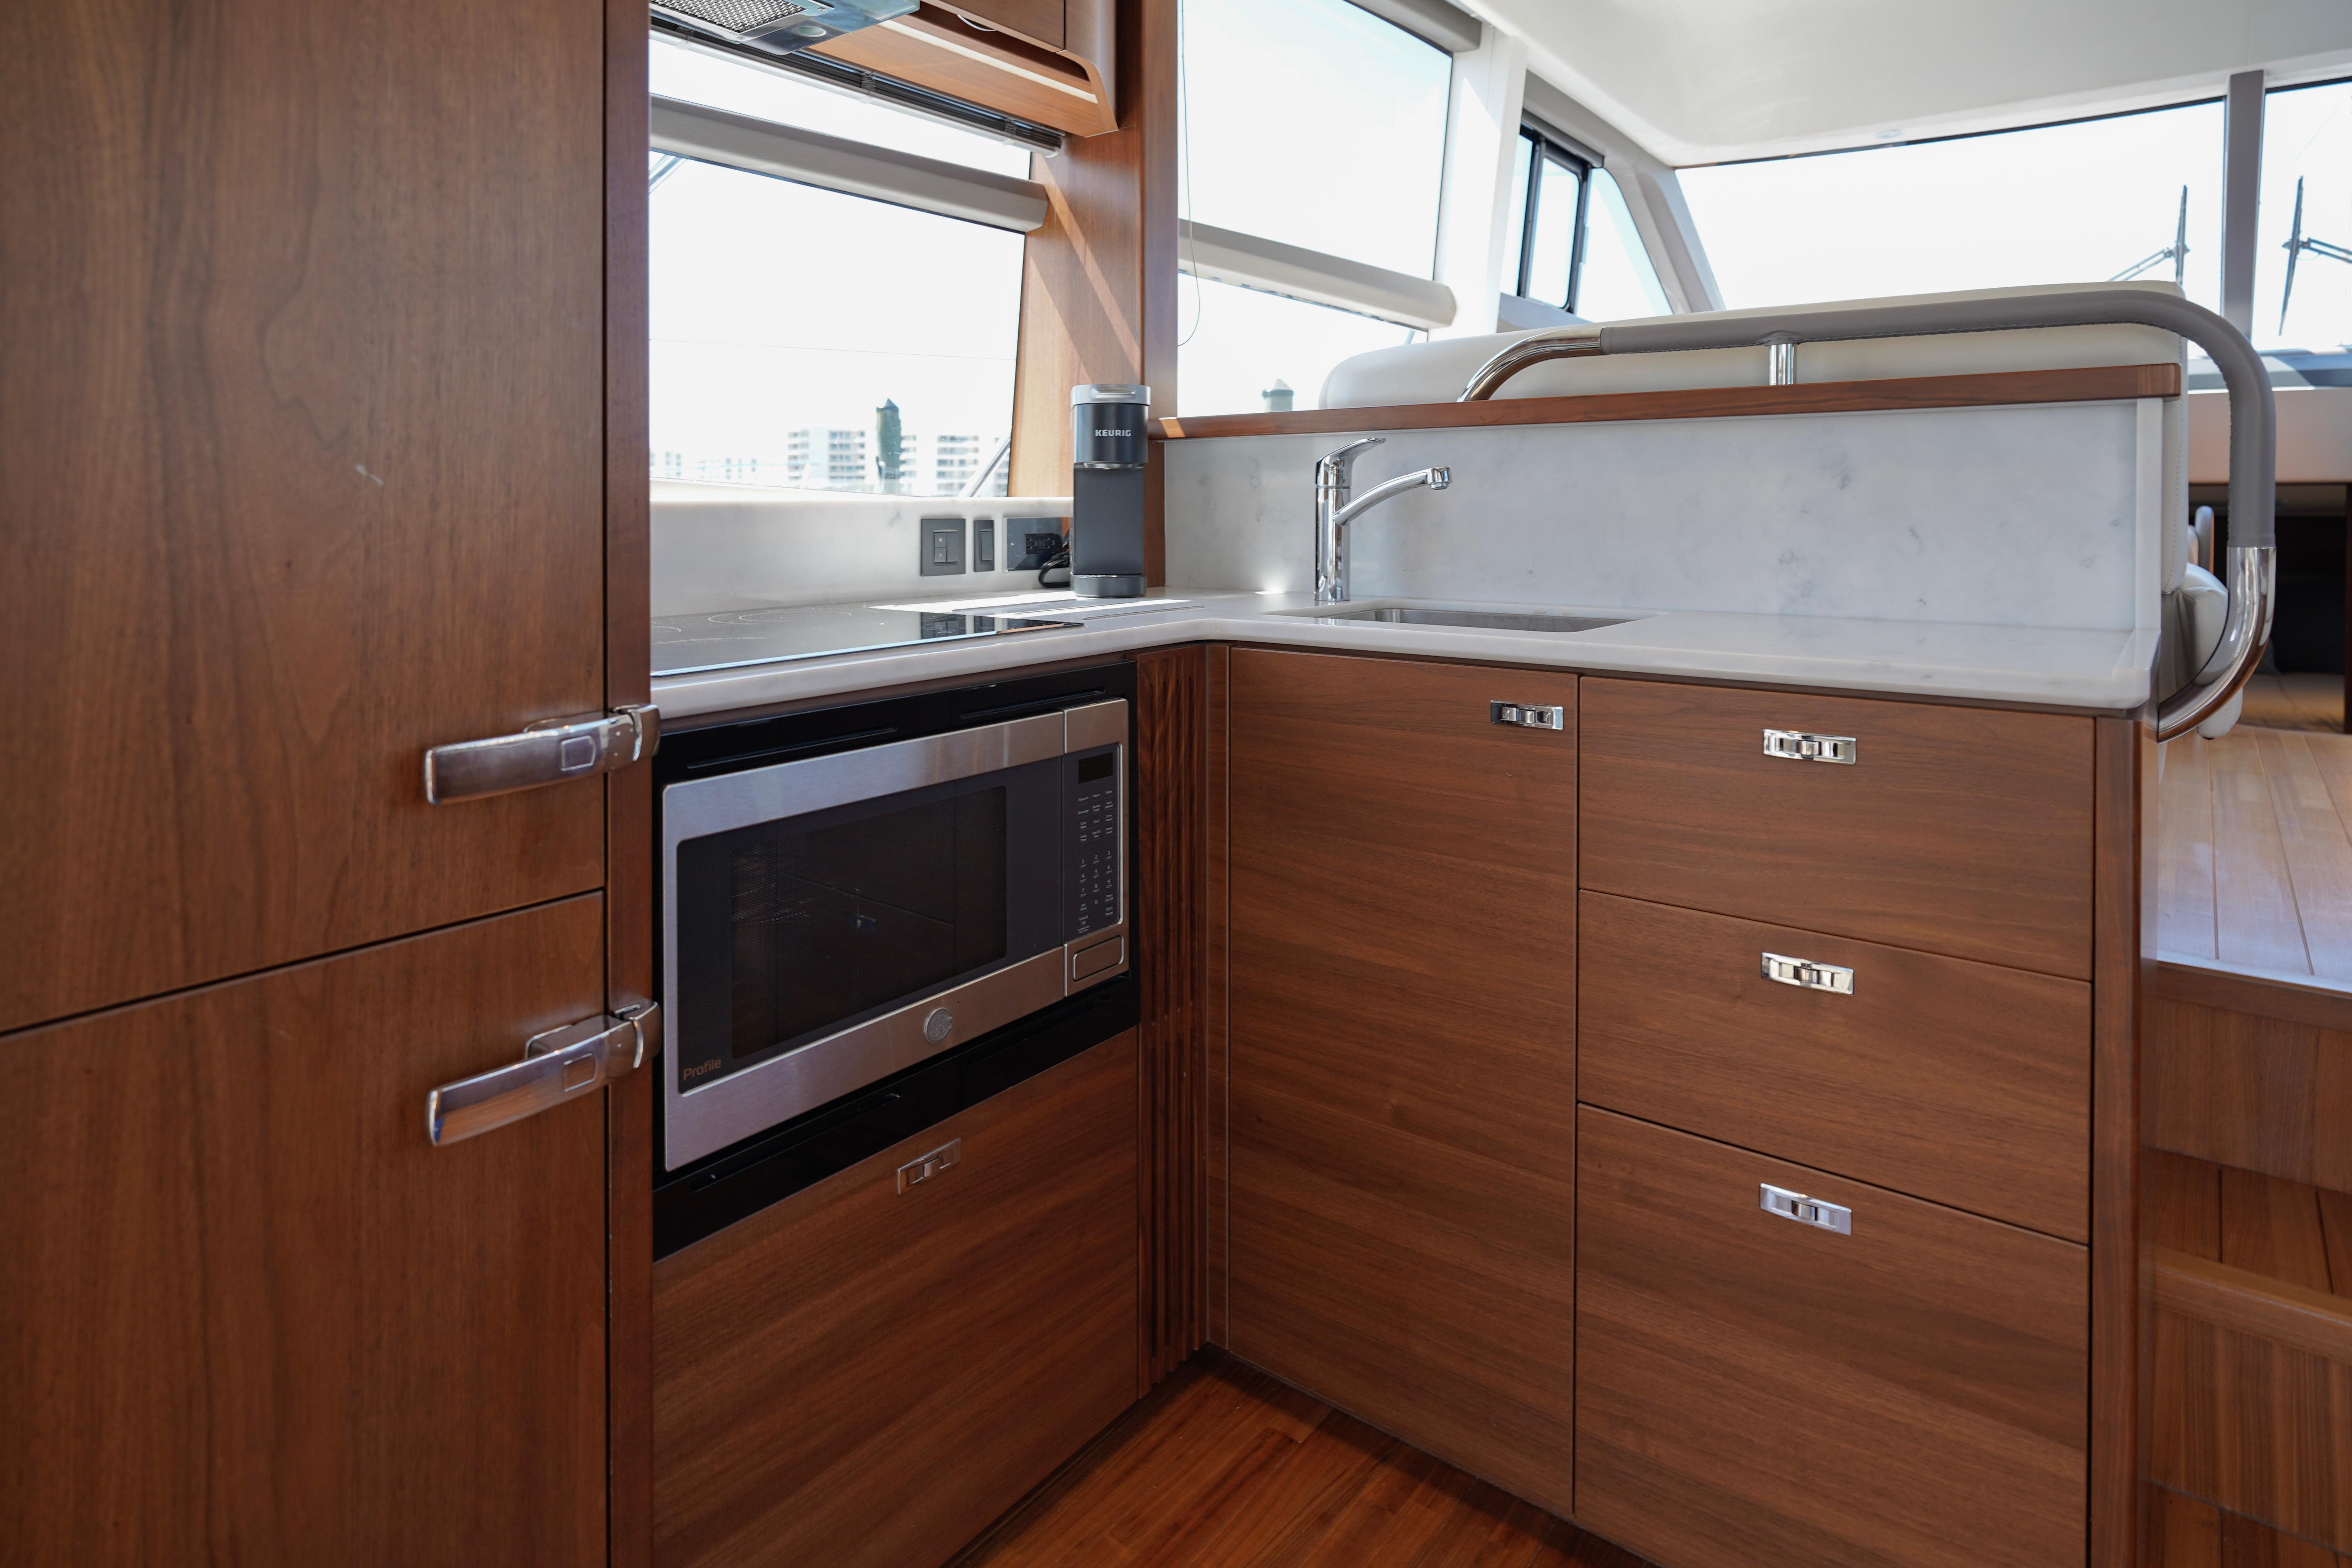 2021 Princess F50- MAKING TIME- Galley